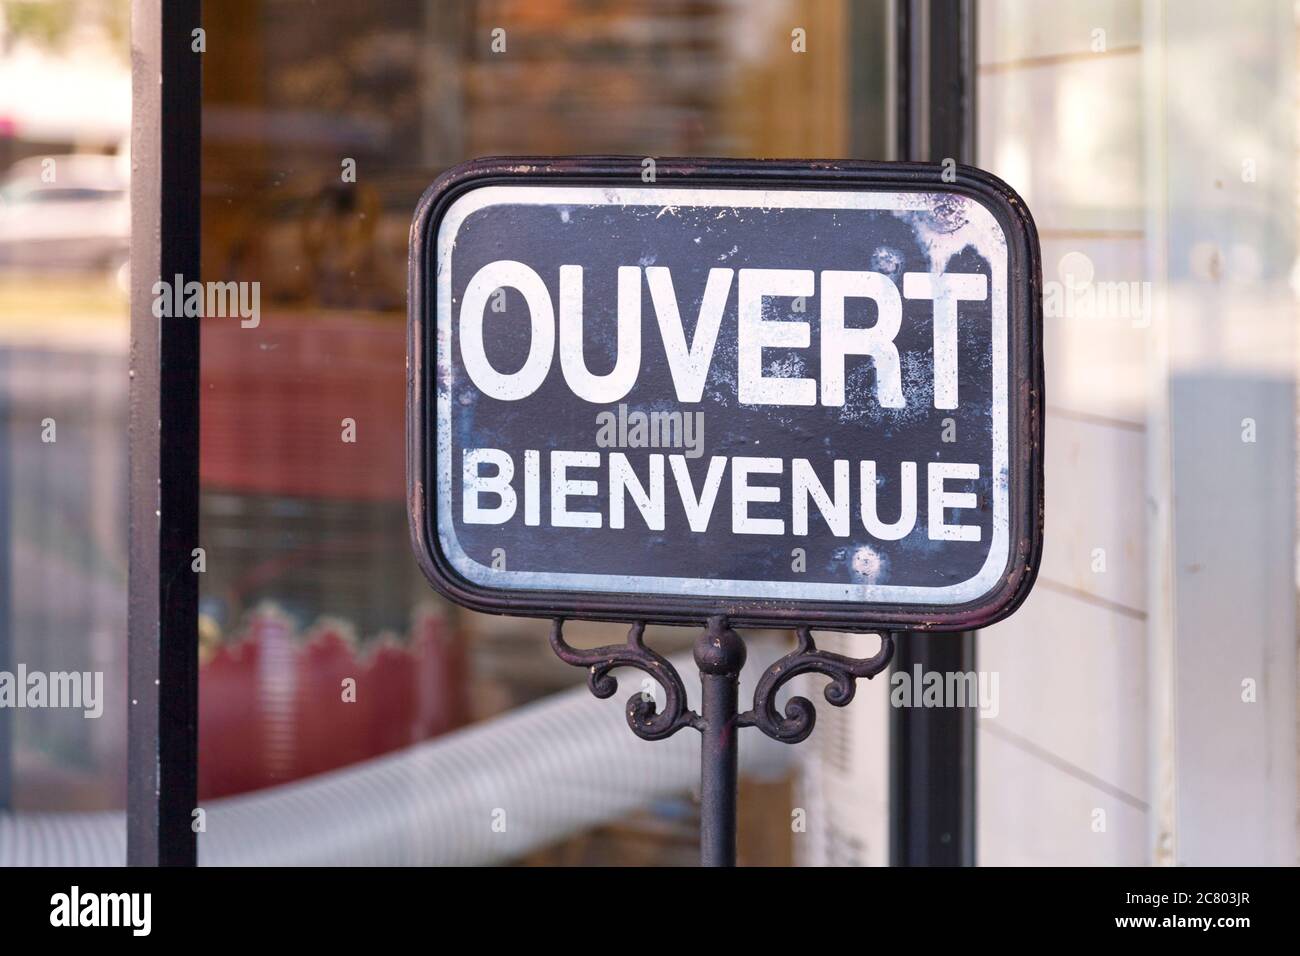 Outdoor open sign with written in it in French 'Ouvert, bienvenue' meaning in English 'Open, welcome'. Stock Photo